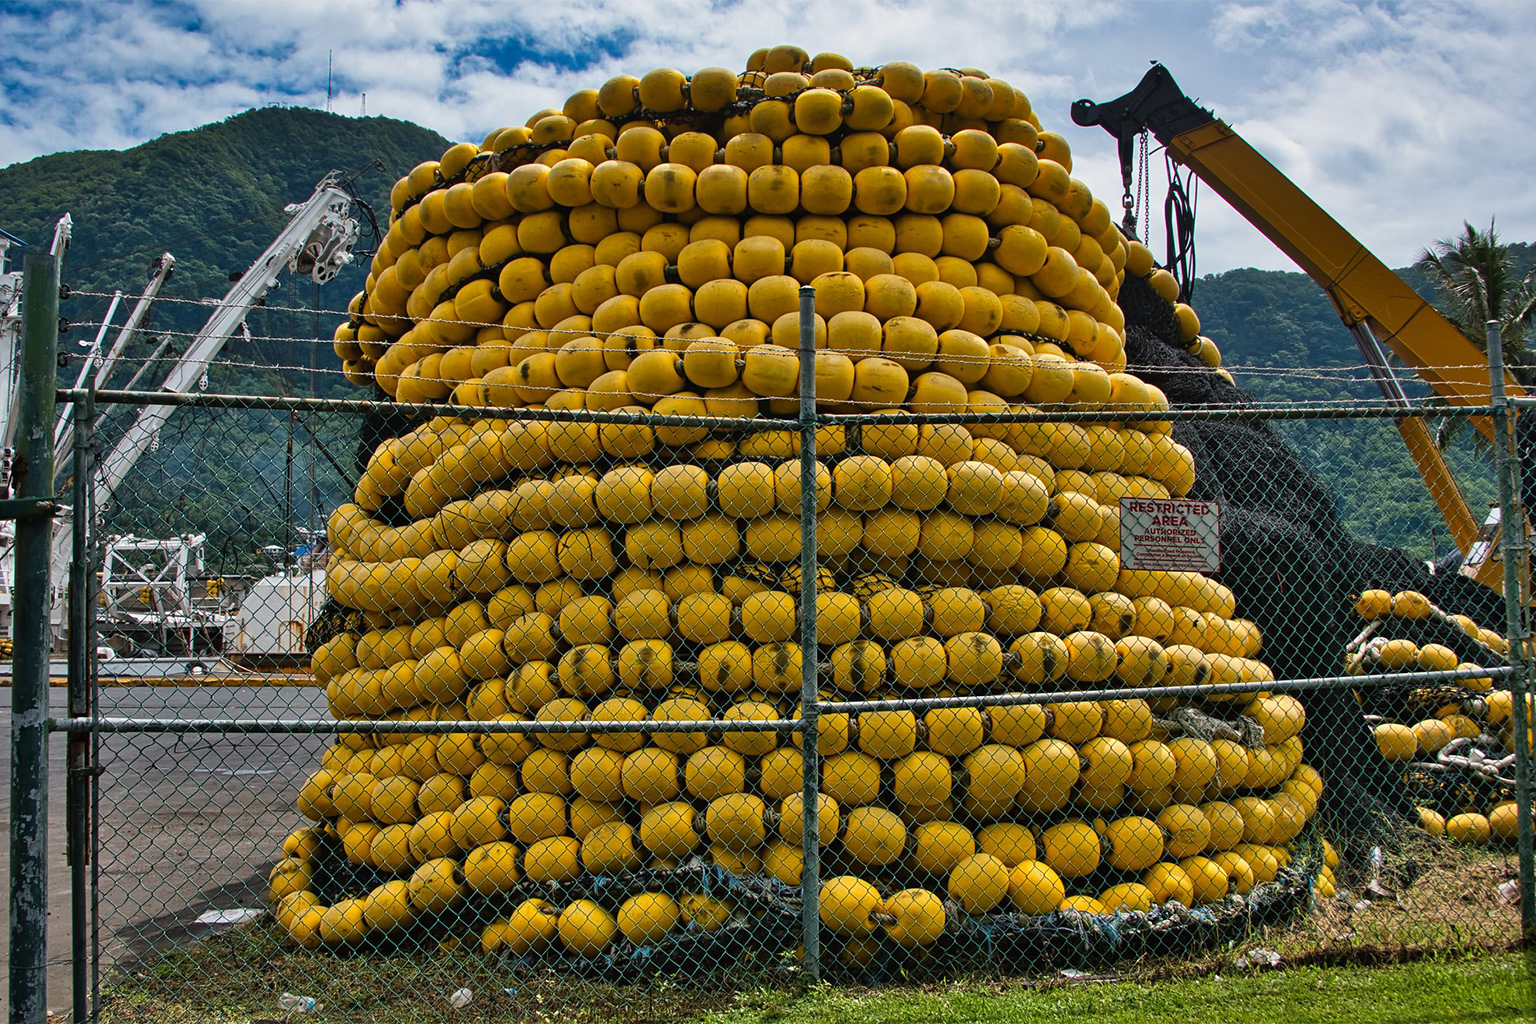 A set of Purse Seine net stored on the dock at the Port of Pago Pago.